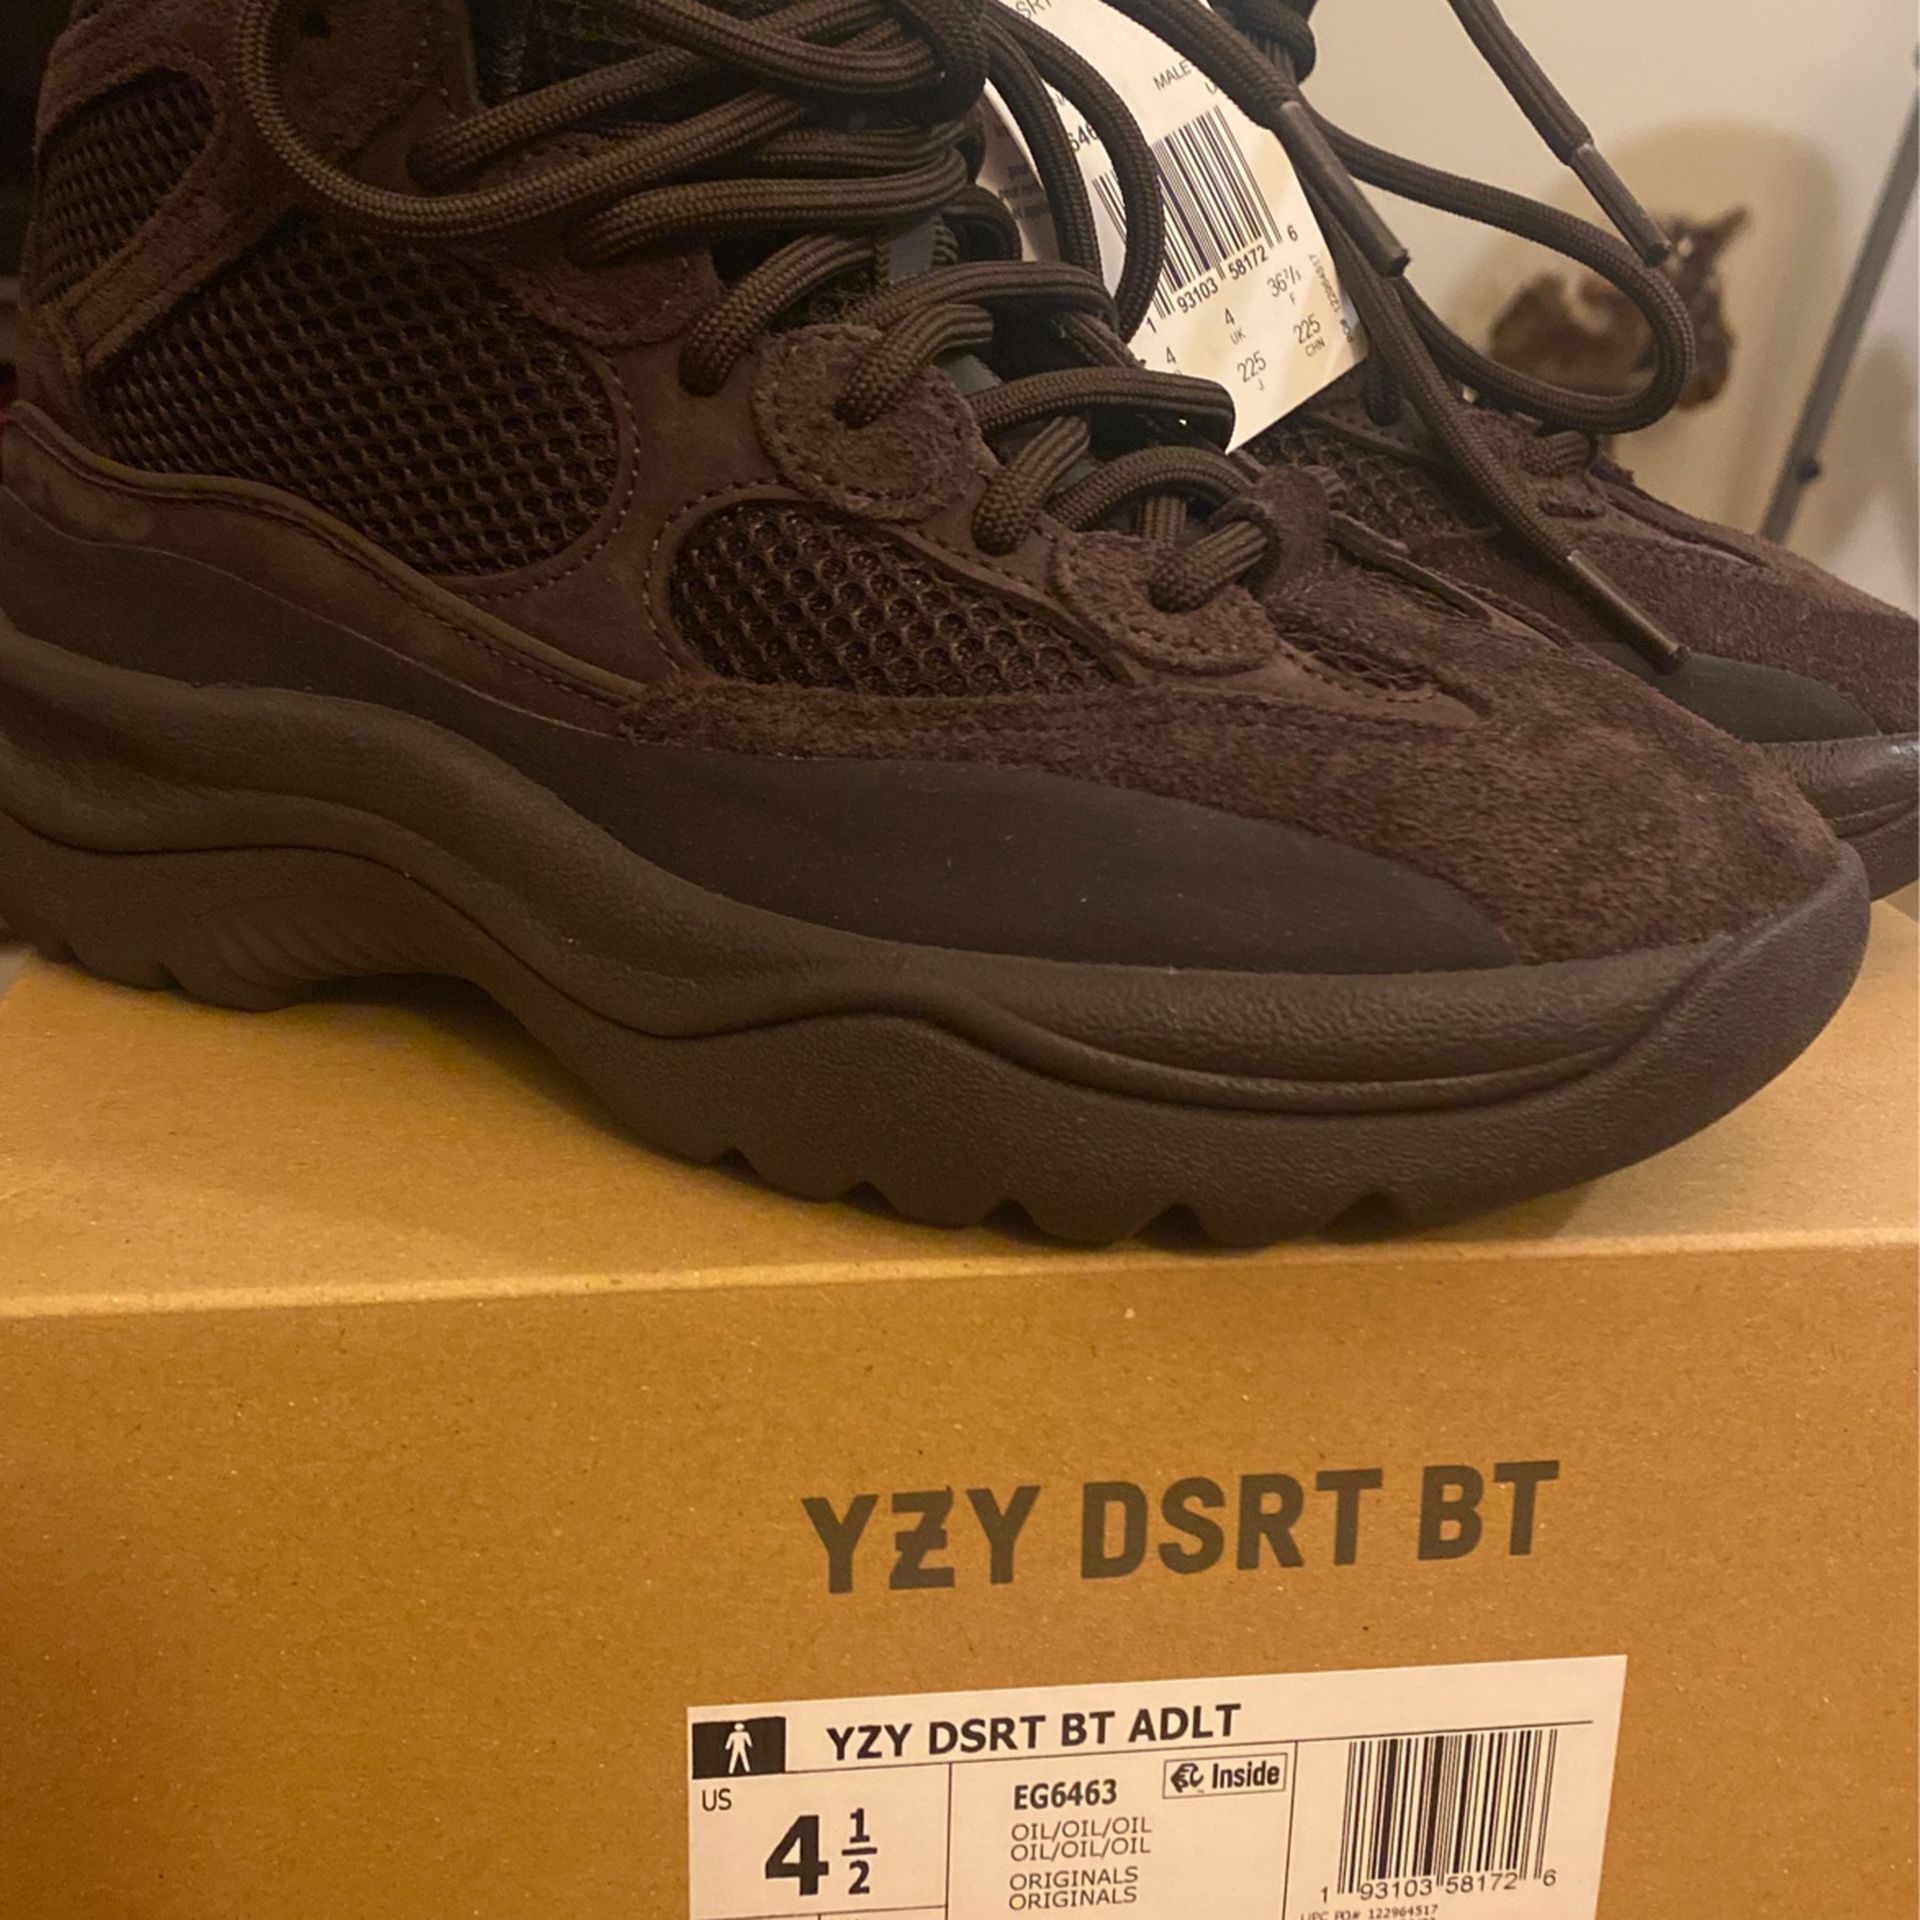 Yeezy Dessert Boot Oil 2021 Release From Adidas Confirmed 